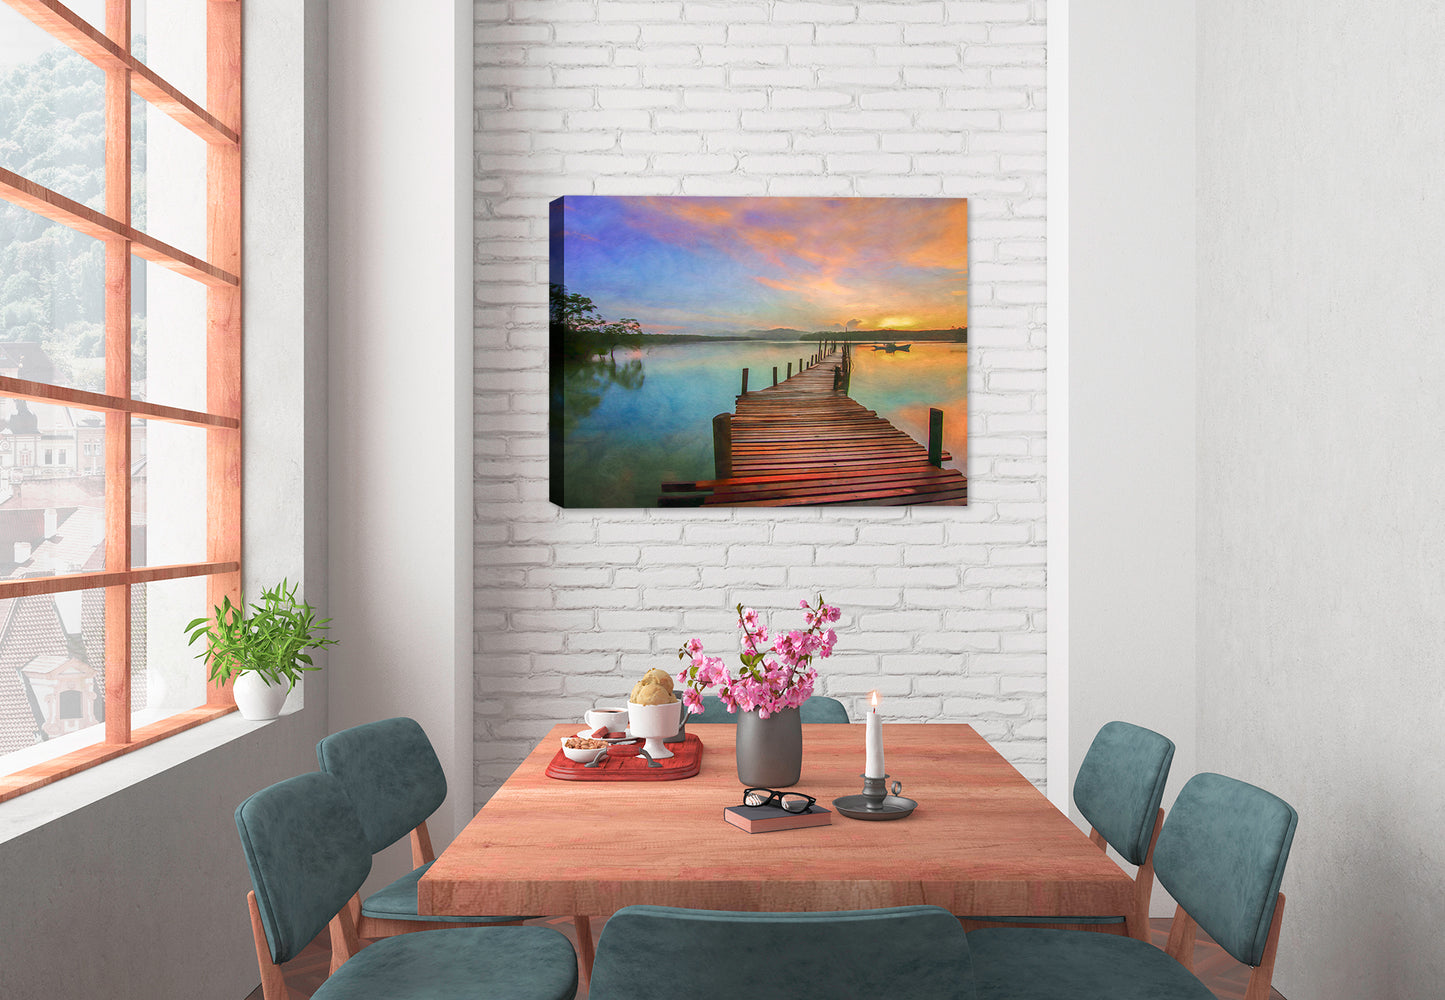 Boardwalk at Sunset on Still Waters - Oil on Canvas